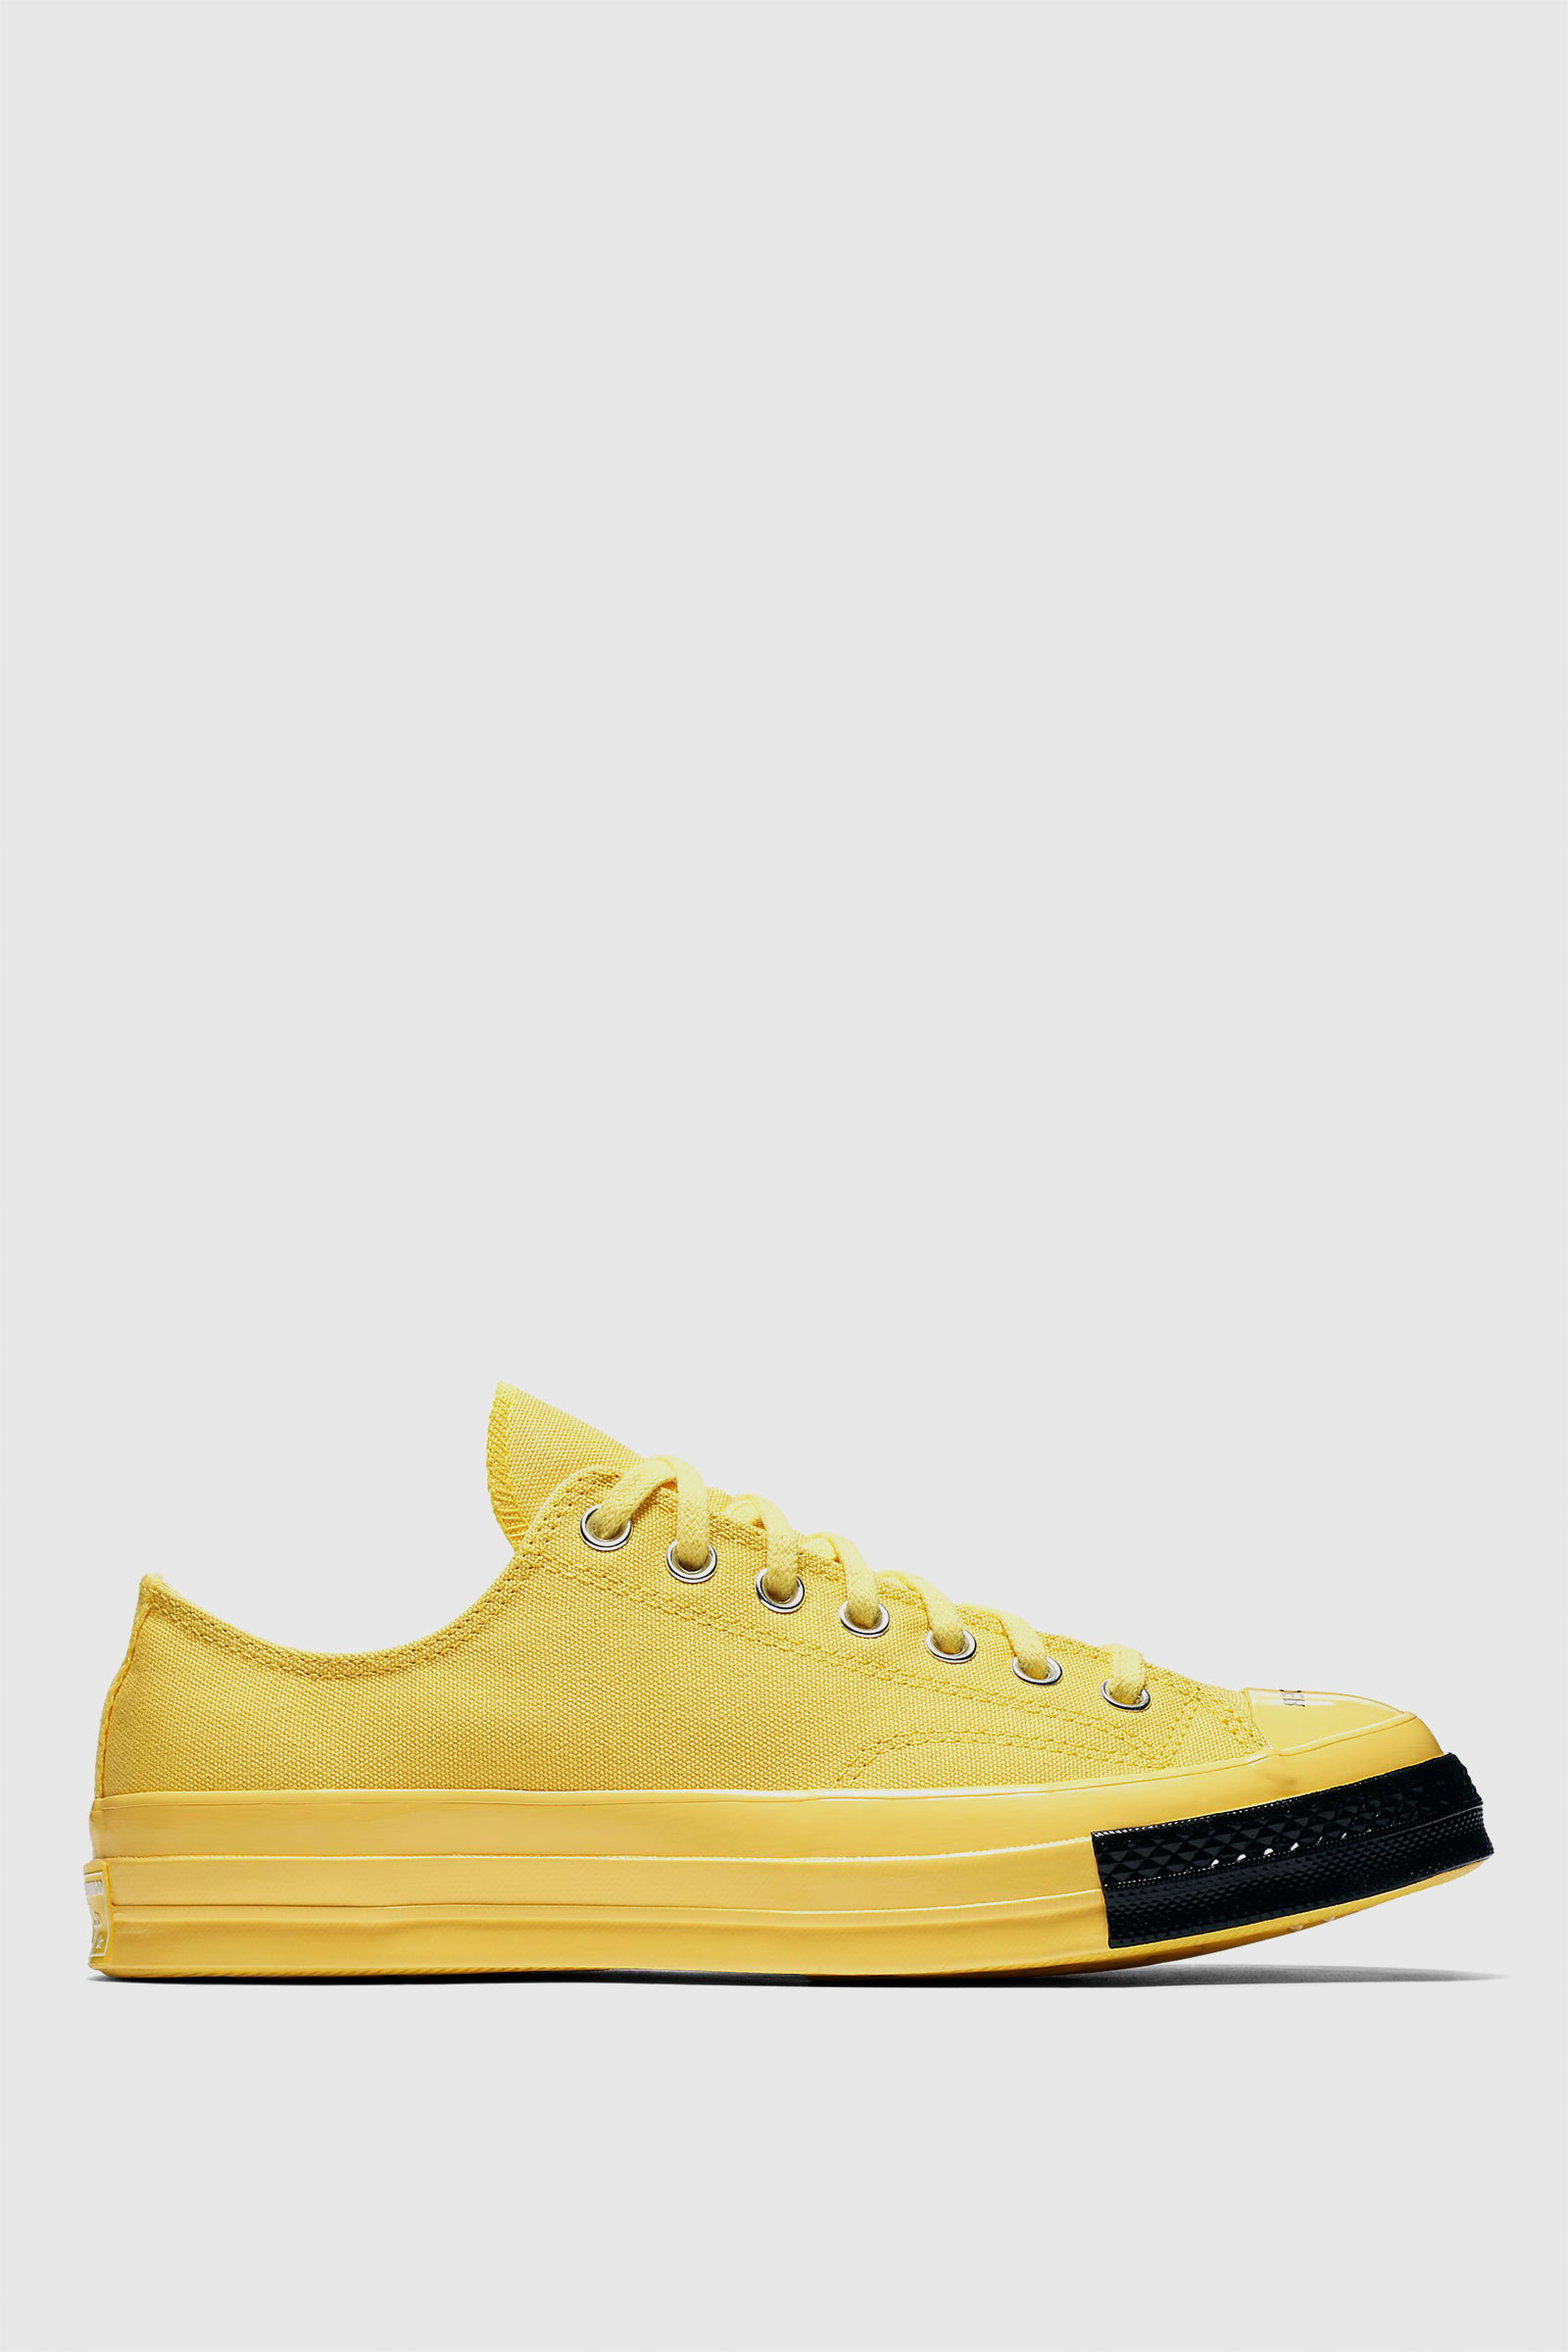 converse 70 low yellow